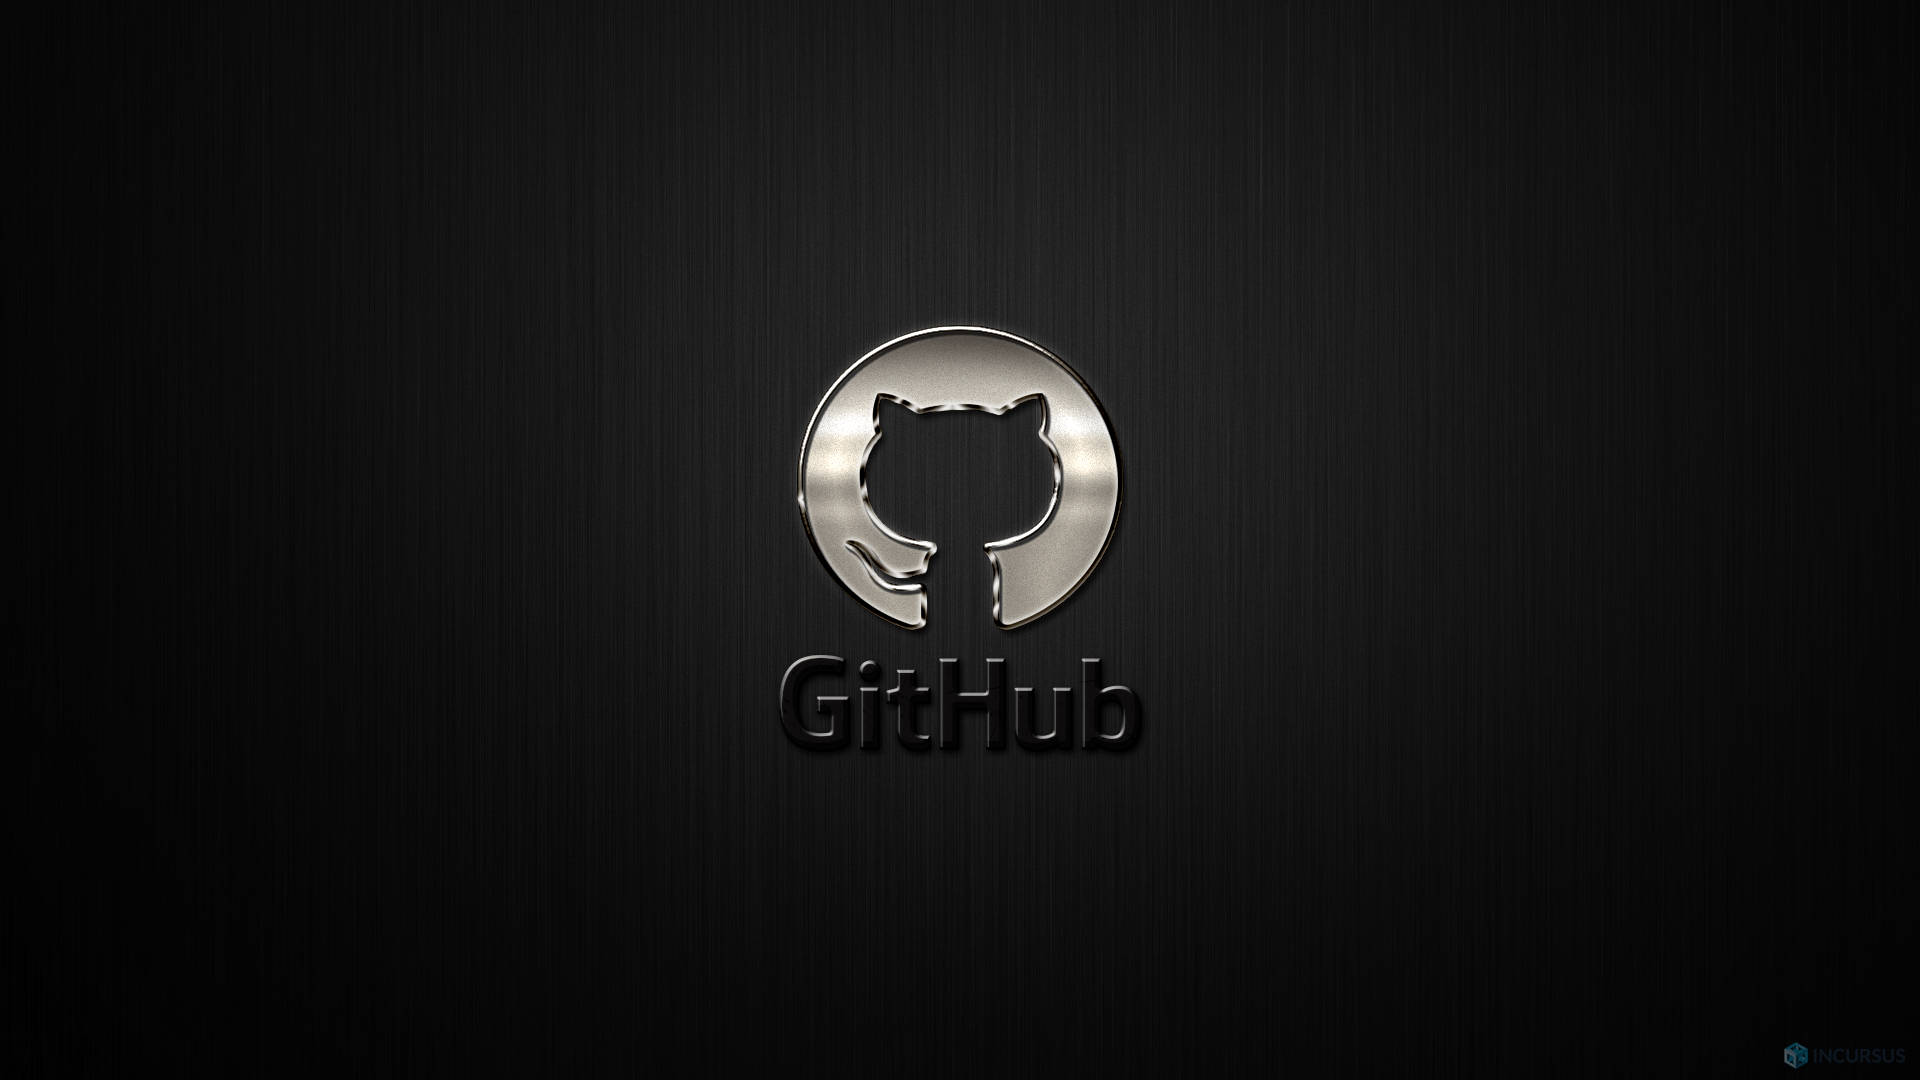 Github 1920X1080 Wallpaper and Background Image